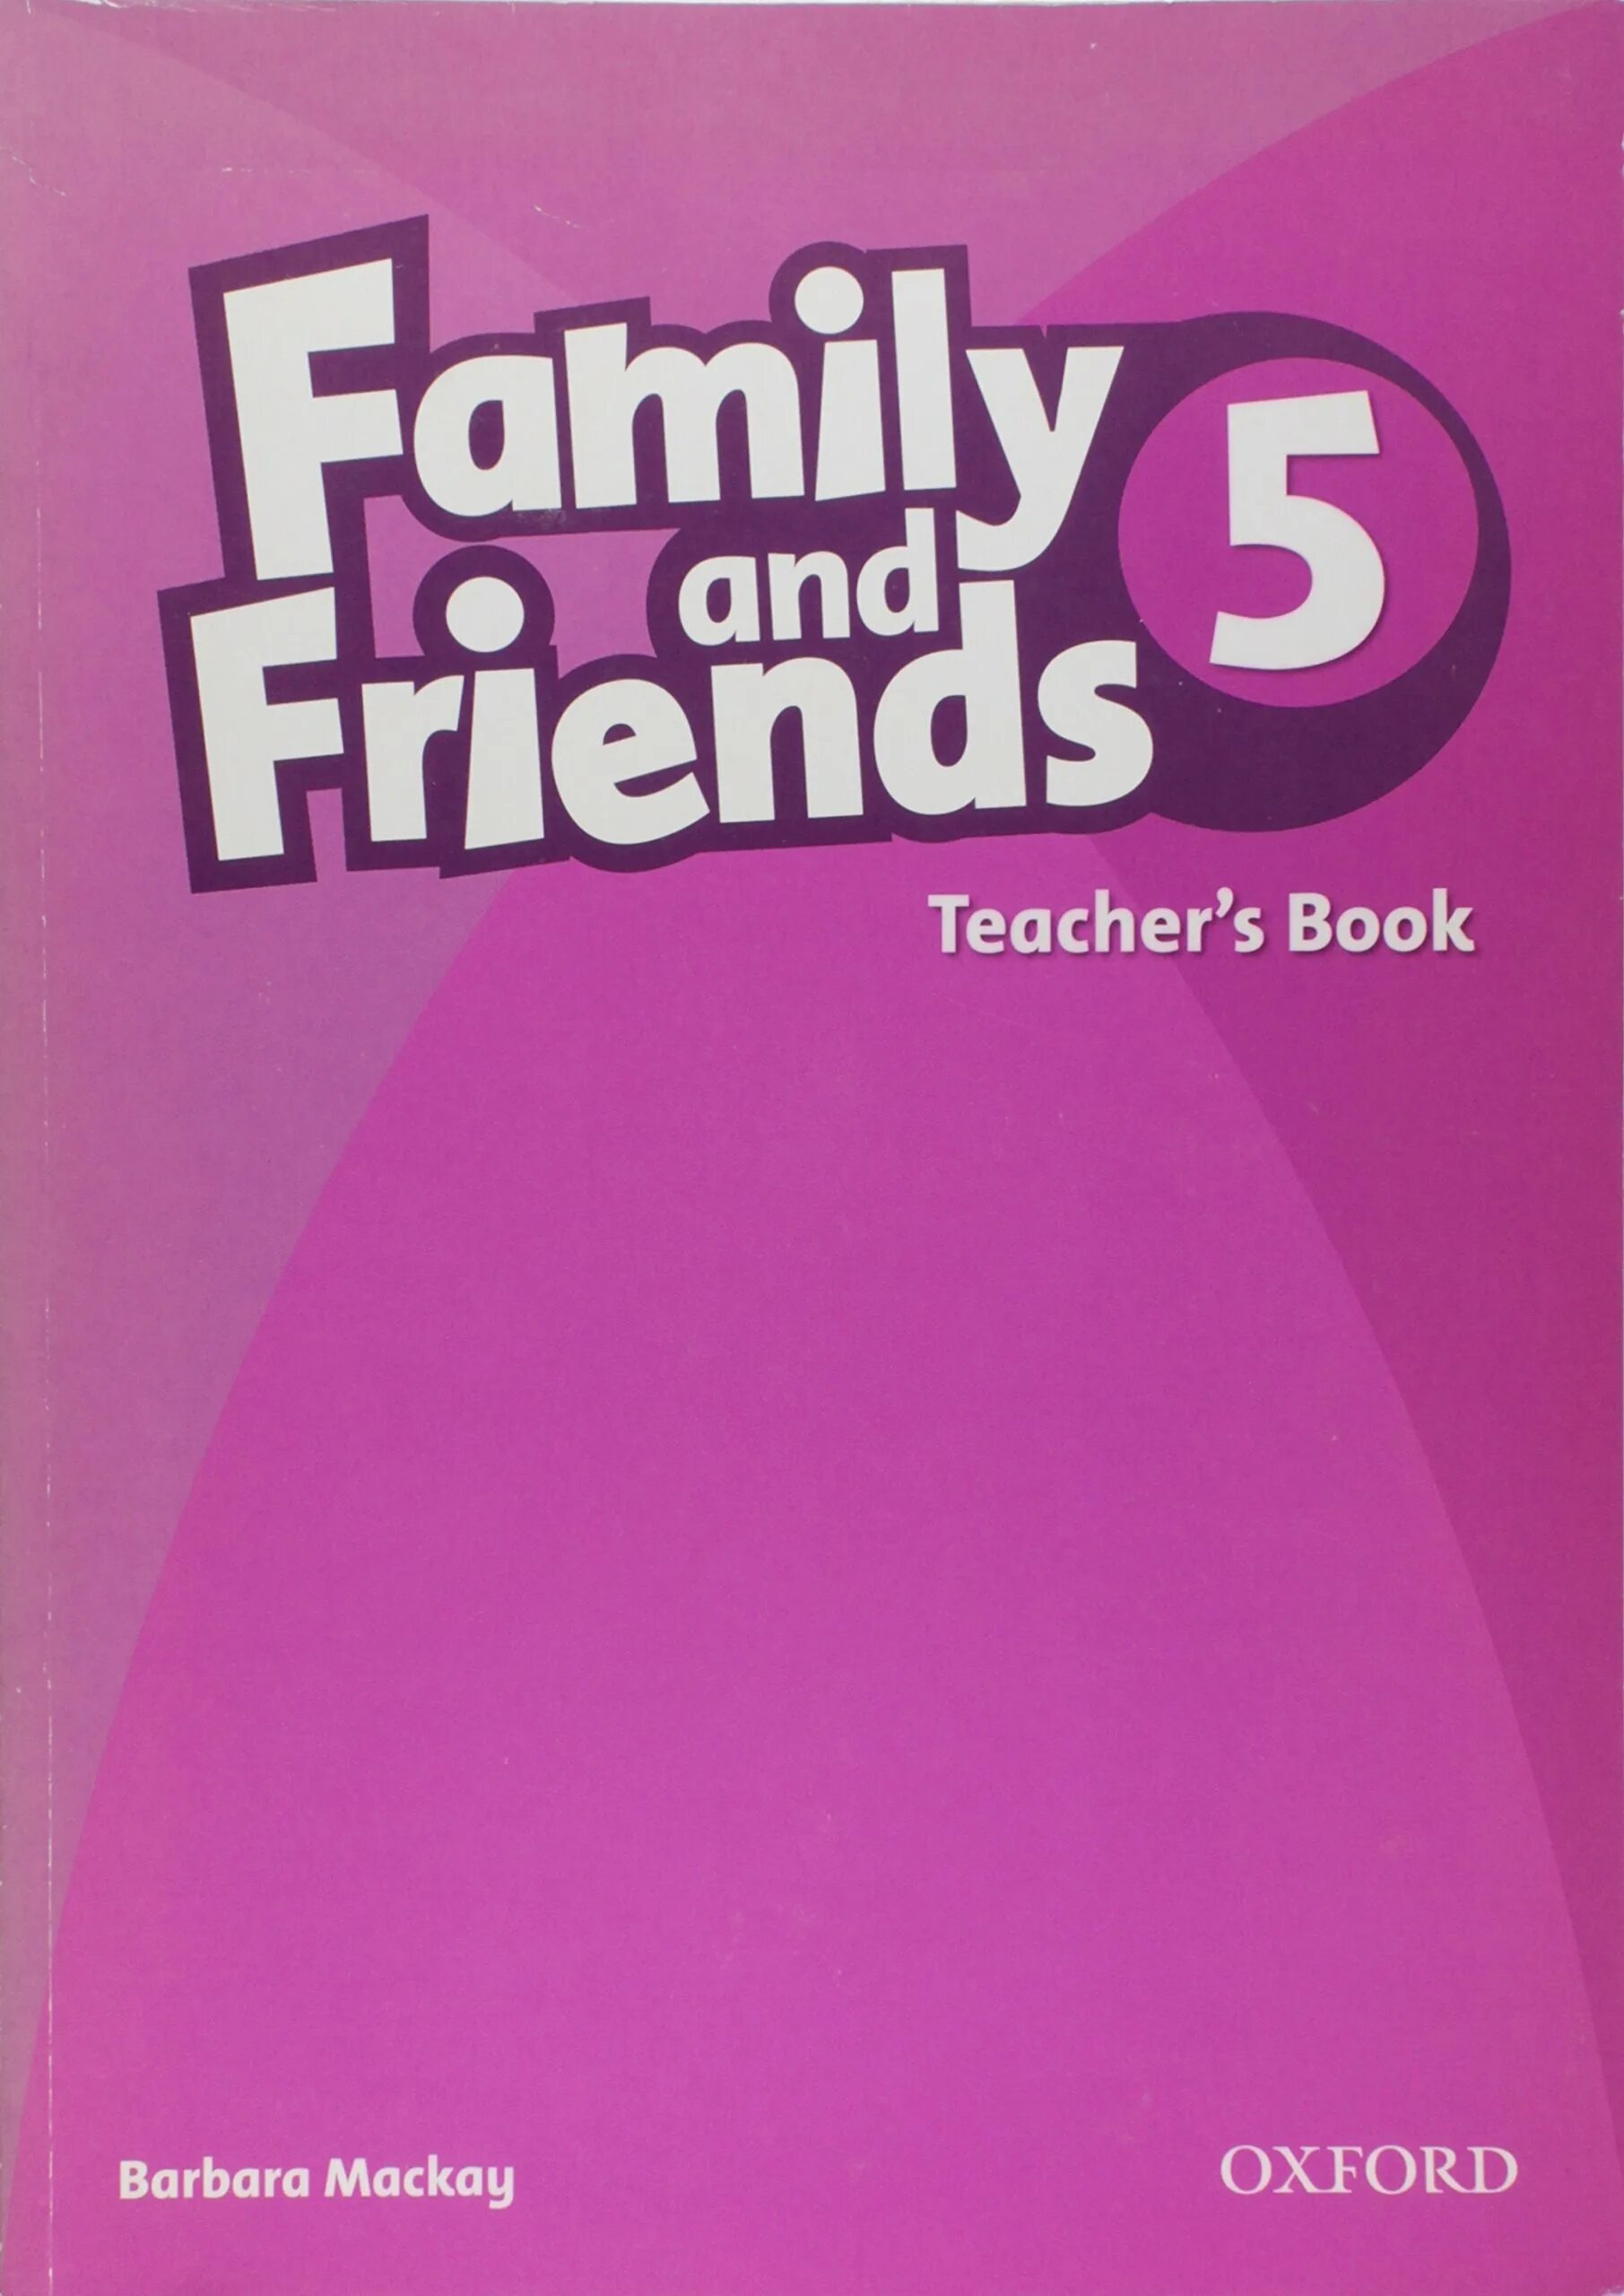 Family student book. Family and friends книги. Family and friends 5 teacher's book. Family and friends 5 class book. Фэмили френдс 5.